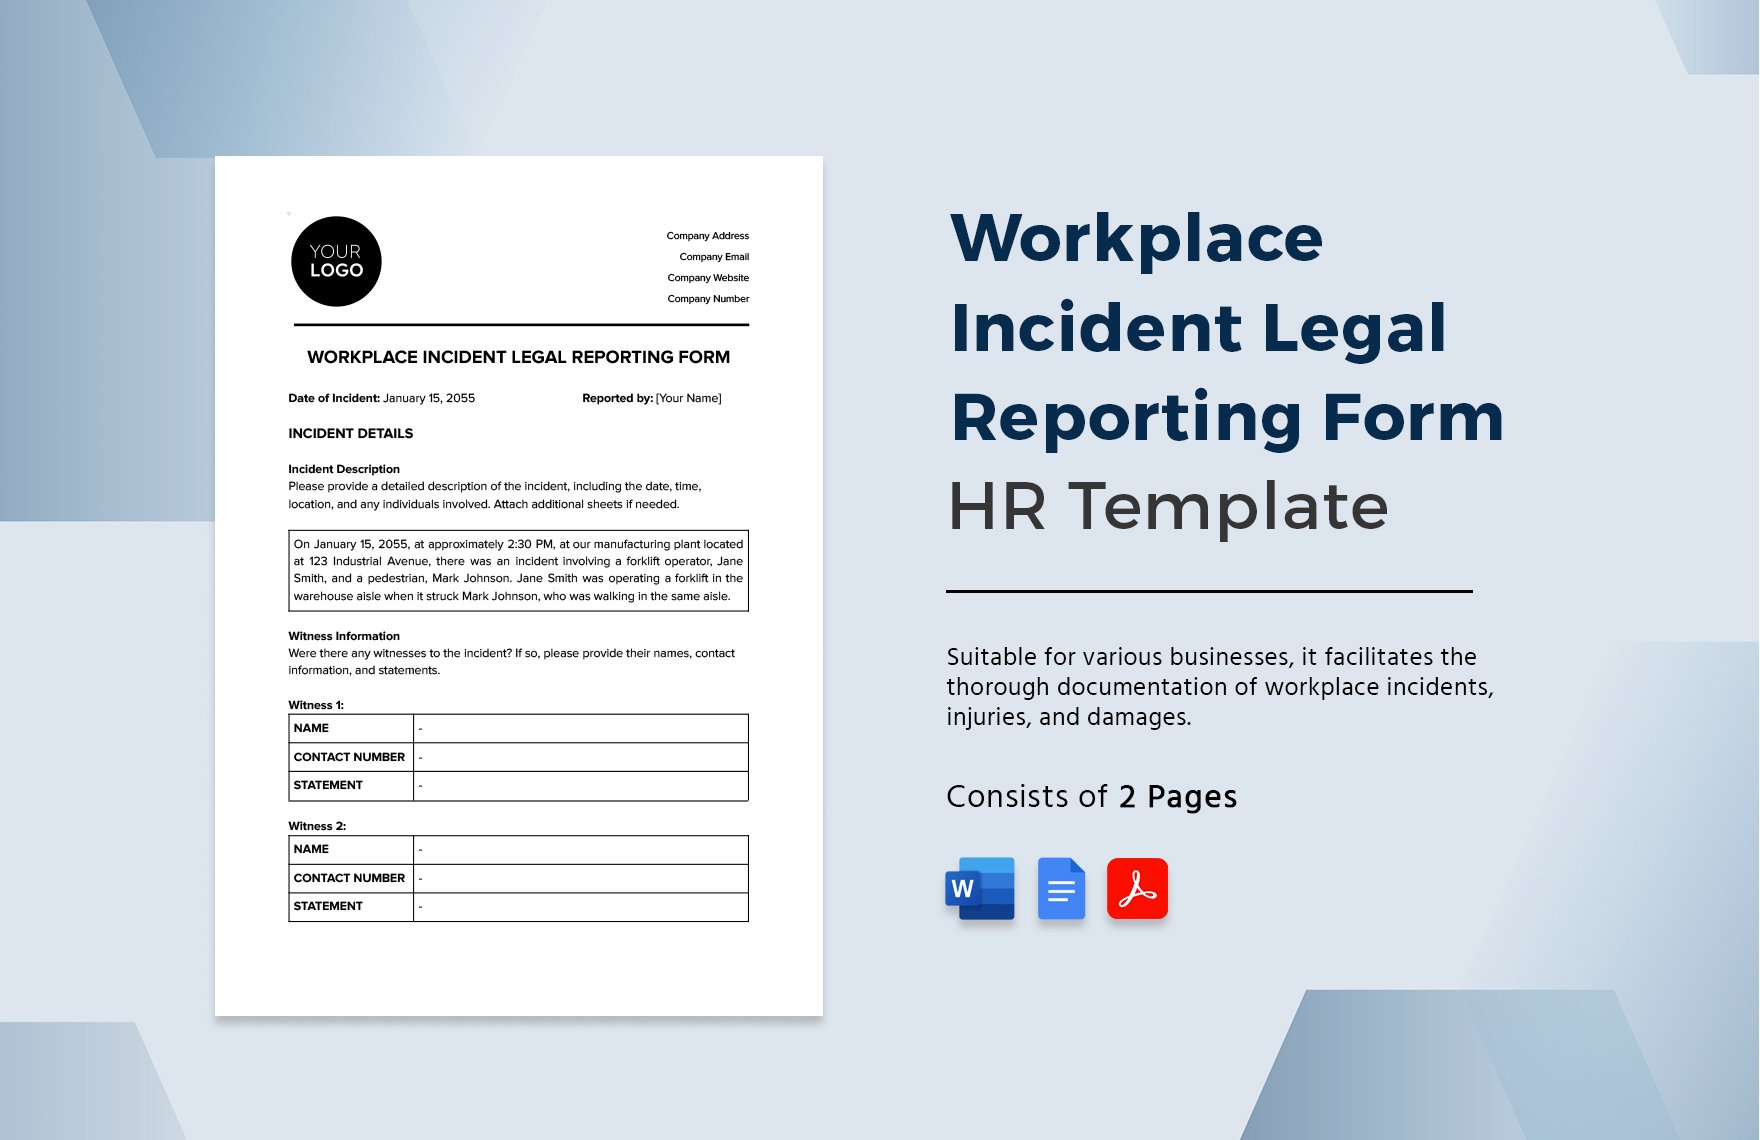 Workplace Incident Legal Reporting Form HR Template in Word, Google Docs, PDF